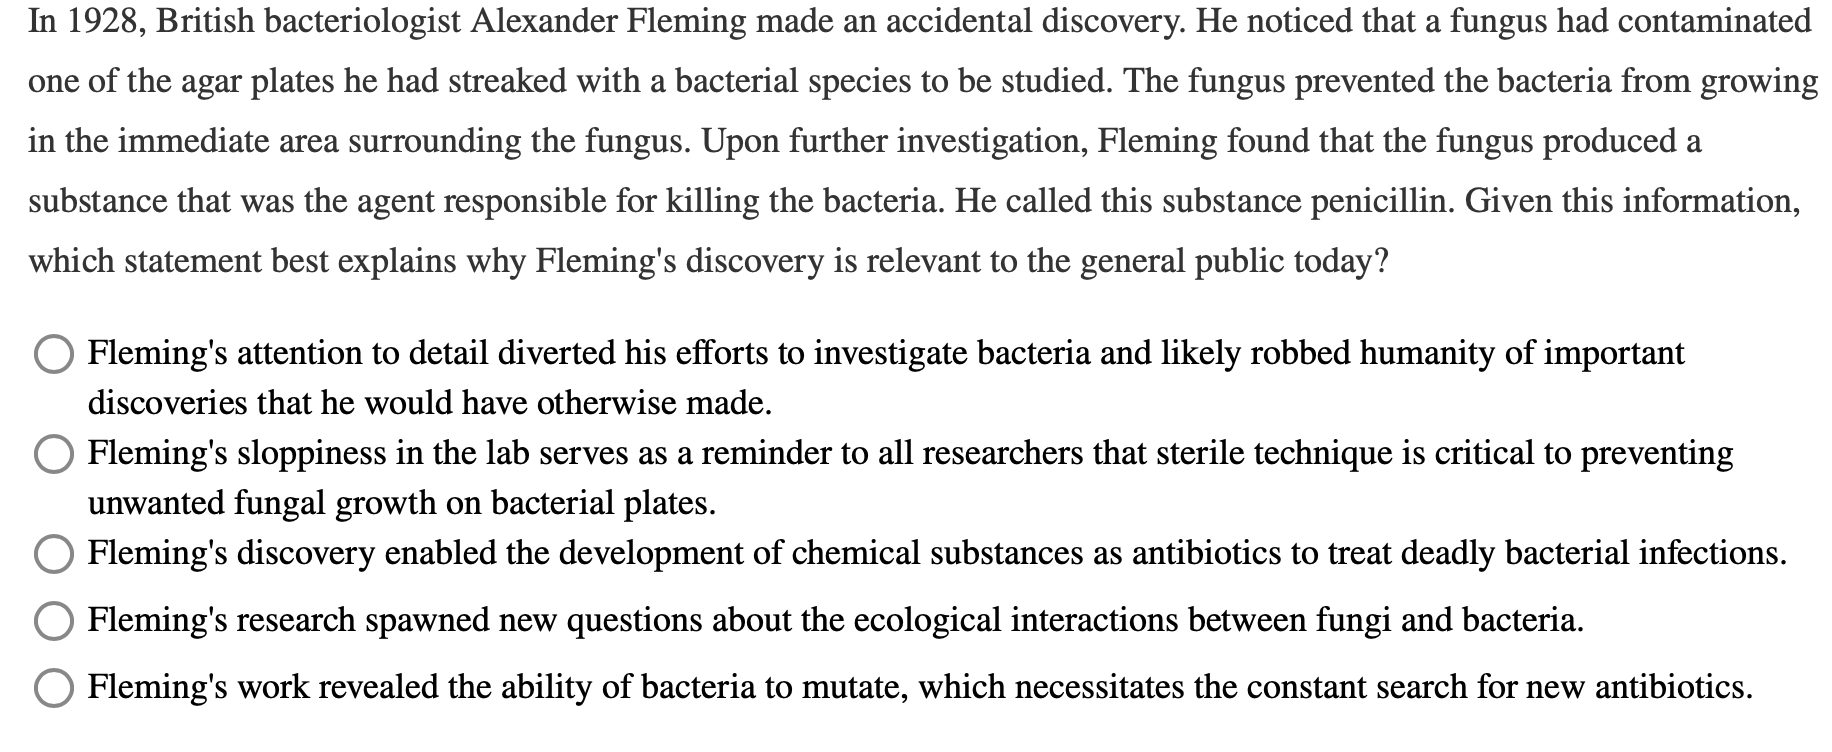 In 1928, British bacteriologist Alexander Fleming made an accidental discovery. He noticed that a fungus had contaminated
one of the agar plates he had streaked with a bacterial species to be studied. The fungus prevented the bacteria from growing
in the immediate area surrounding the fungus. Upon further investigation, Fleming found that the fungus produced a
substance that was the agent responsible for killing the bacteria. He called this substance penicillin. Given this information,
which statement best explains why Fleming's discovery is relevant to the general public today?
O Fleming's attention to detail diverted his efforts to investigate bacteria and likely robbed humanity of important
discoveries that he would have otherwise made.
Fleming's sloppiness in the lab serves as a reminder to all researchers that sterile technique is critical to preventing
unwanted fungal growth on bacterial plates.
Fleming's discovery enabled the development of chemical substances as antibiotics to treat deadly bacterial infections.
Fleming's research spawned new questions about the ecological interactions between fungi and bacteria.
Fleming's work revealed the ability of bacteria to mutate, which necessitates the constant search for new antibiotics.
